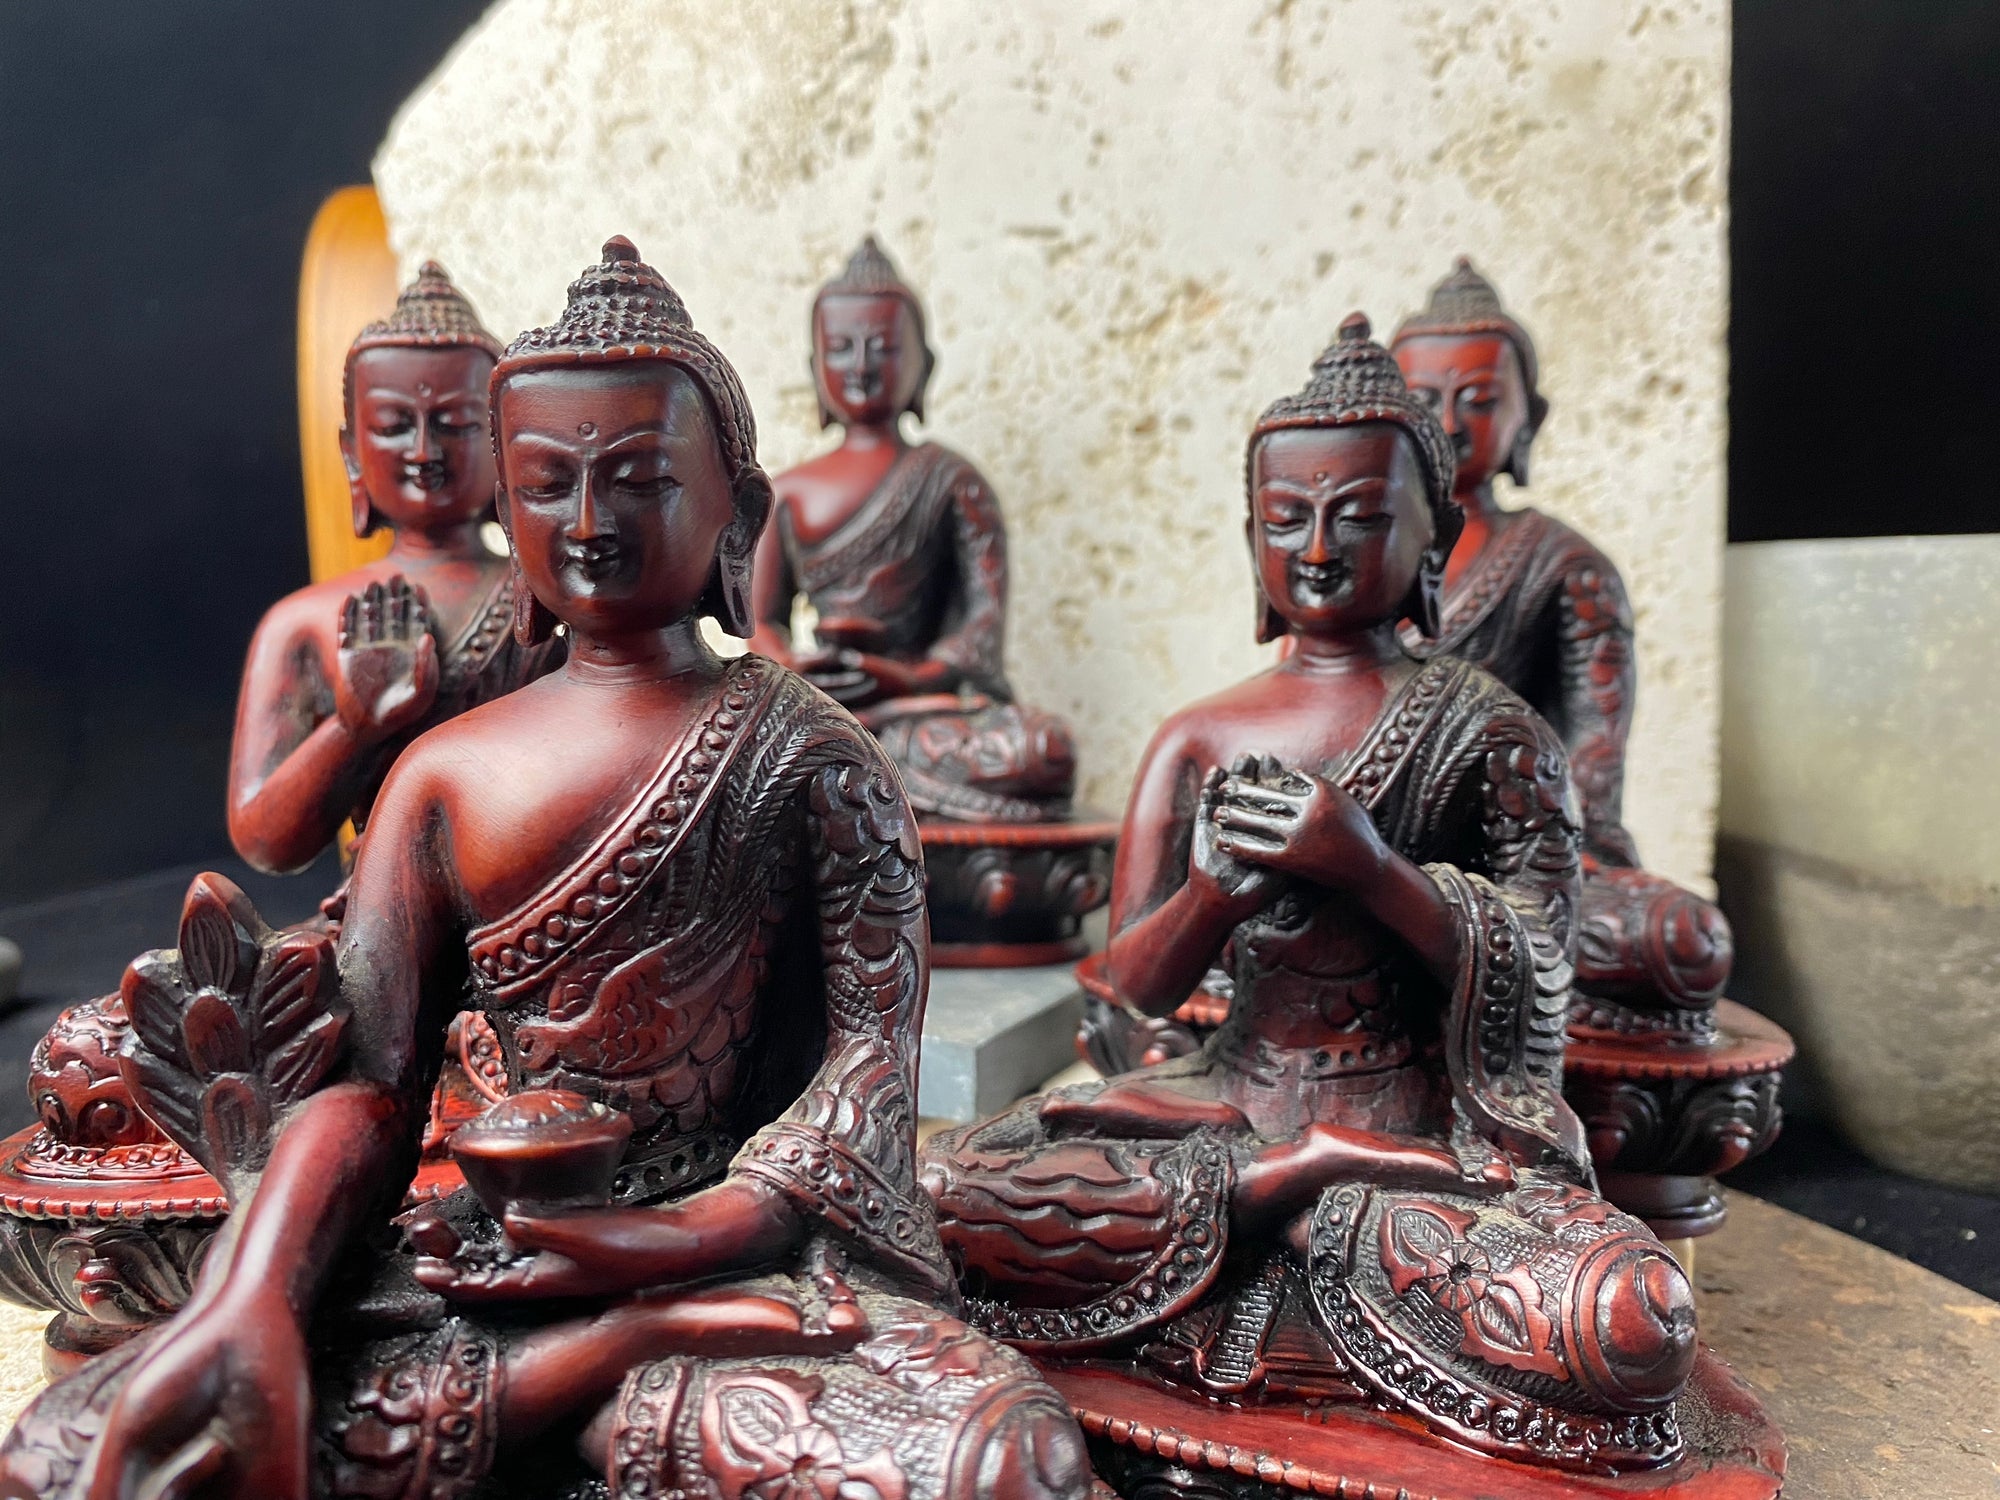 Resin buddha statues from Nepal